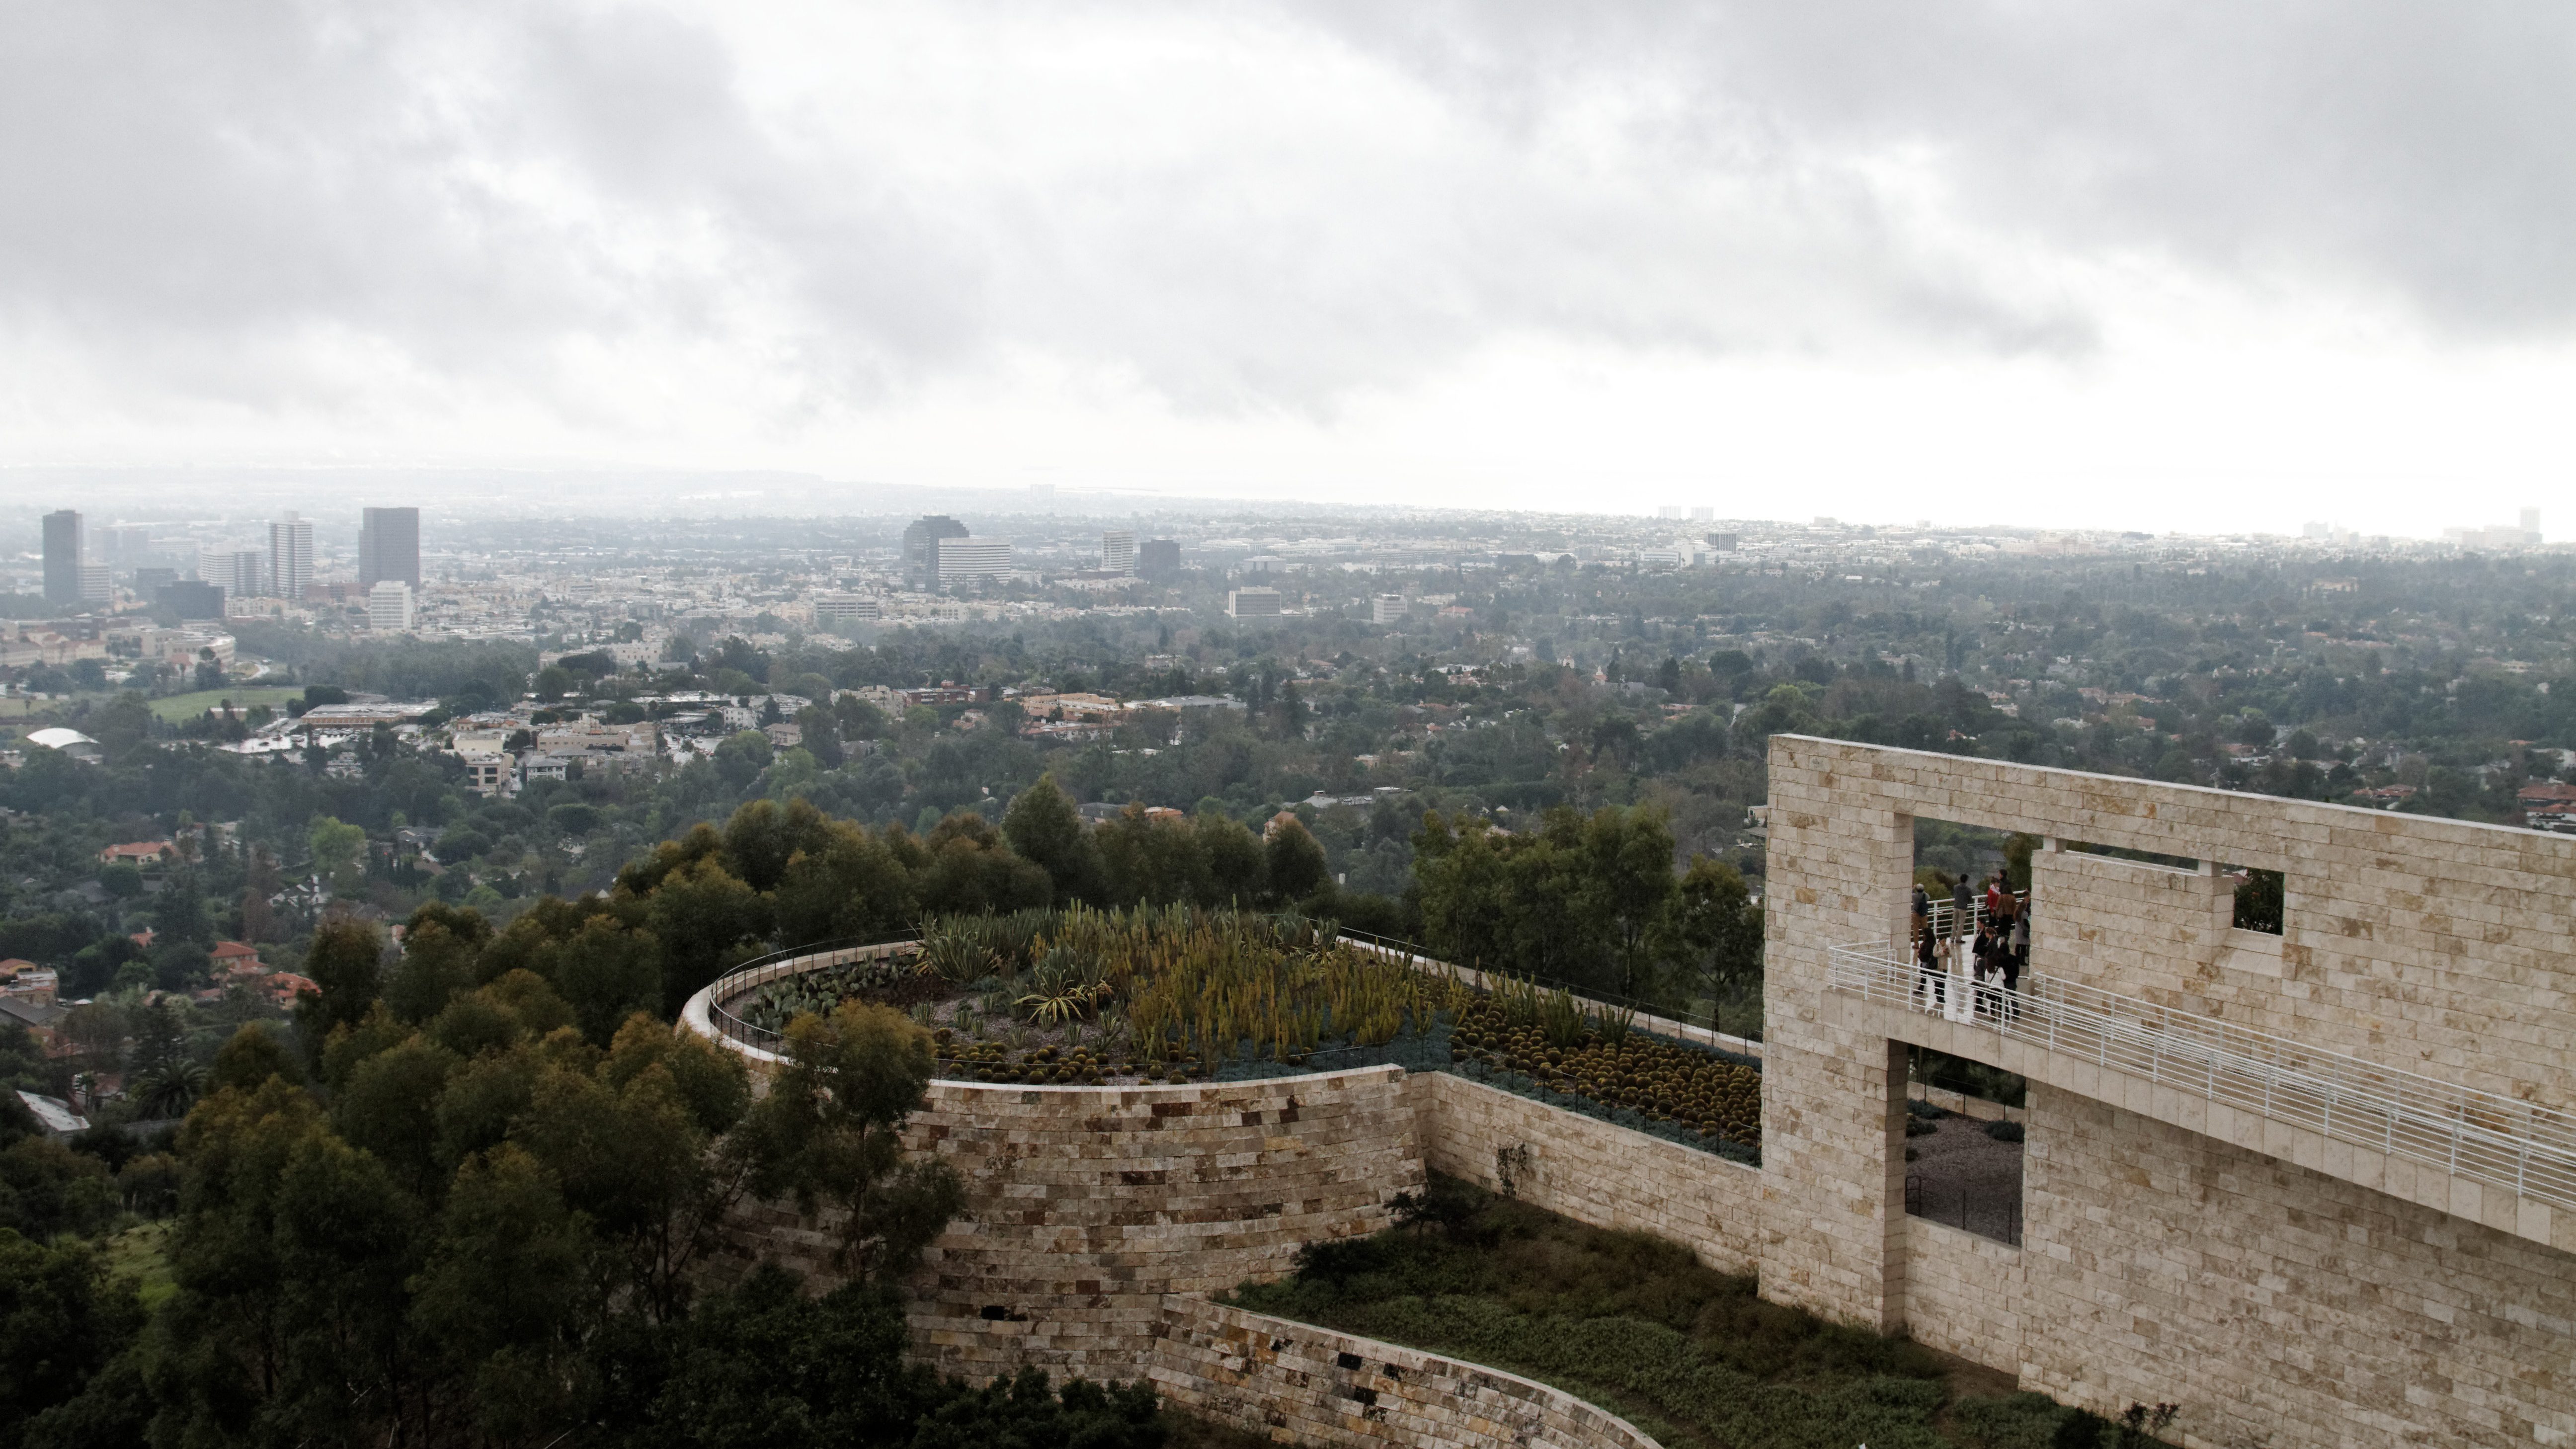 A view of Los Angeles from the Getty Center, a campus of the Getty Museum